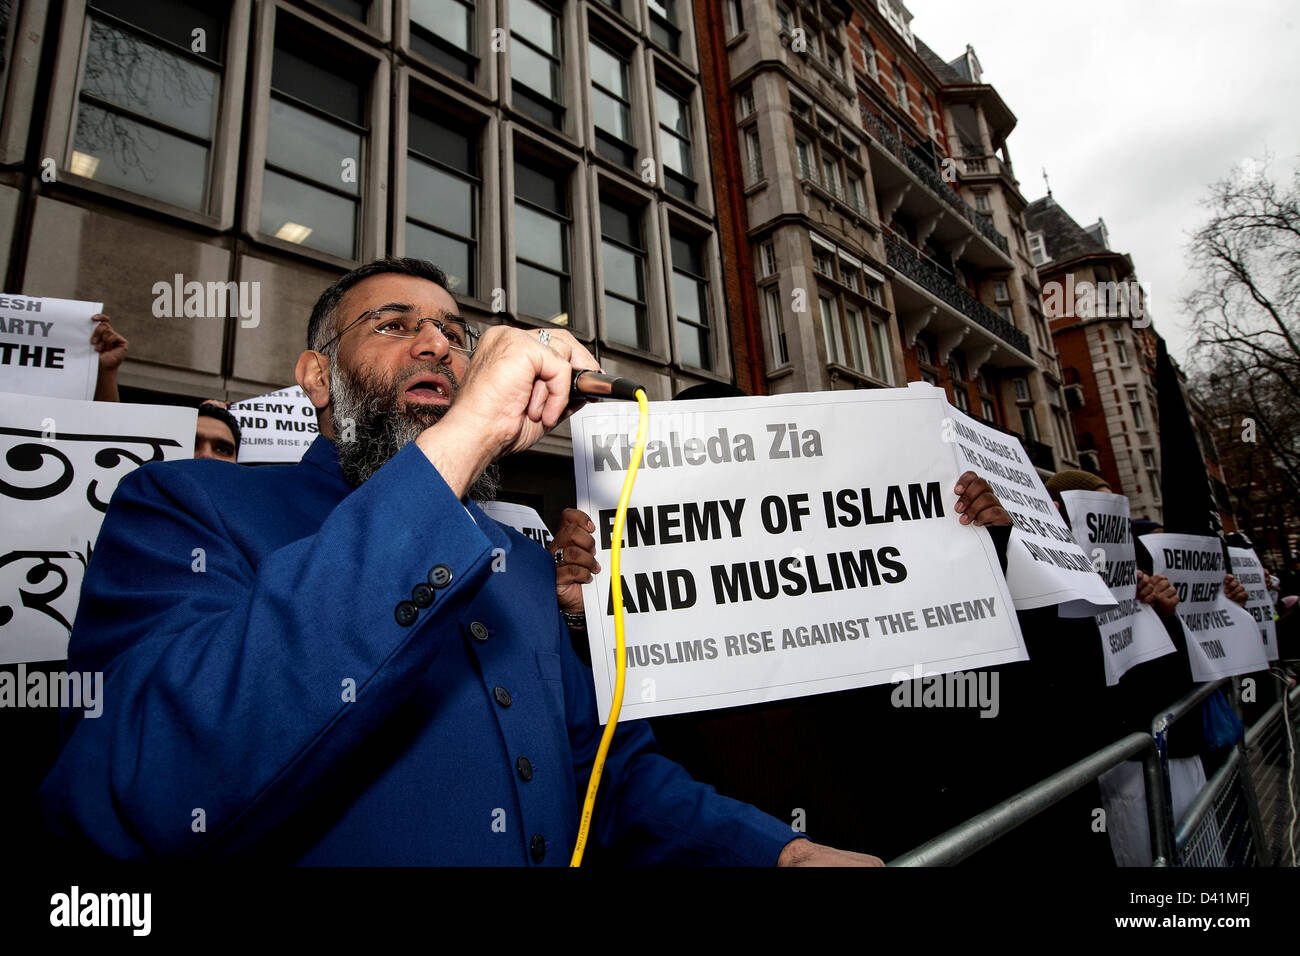 London, UK. 1st March 2013. Extremist Islamic protest group led by cleric Anjem Choudry demonstrate against Bangladesh outside the Bangladeshi embassy. They are angry at the call for arrests of muslim leaders who have sided with Pakistan, and the oppression of muslims by the government. 01/03/2013 , London, United Kingdom  Credit:  Mario Mitsis / Alamy Live News Stock Photo